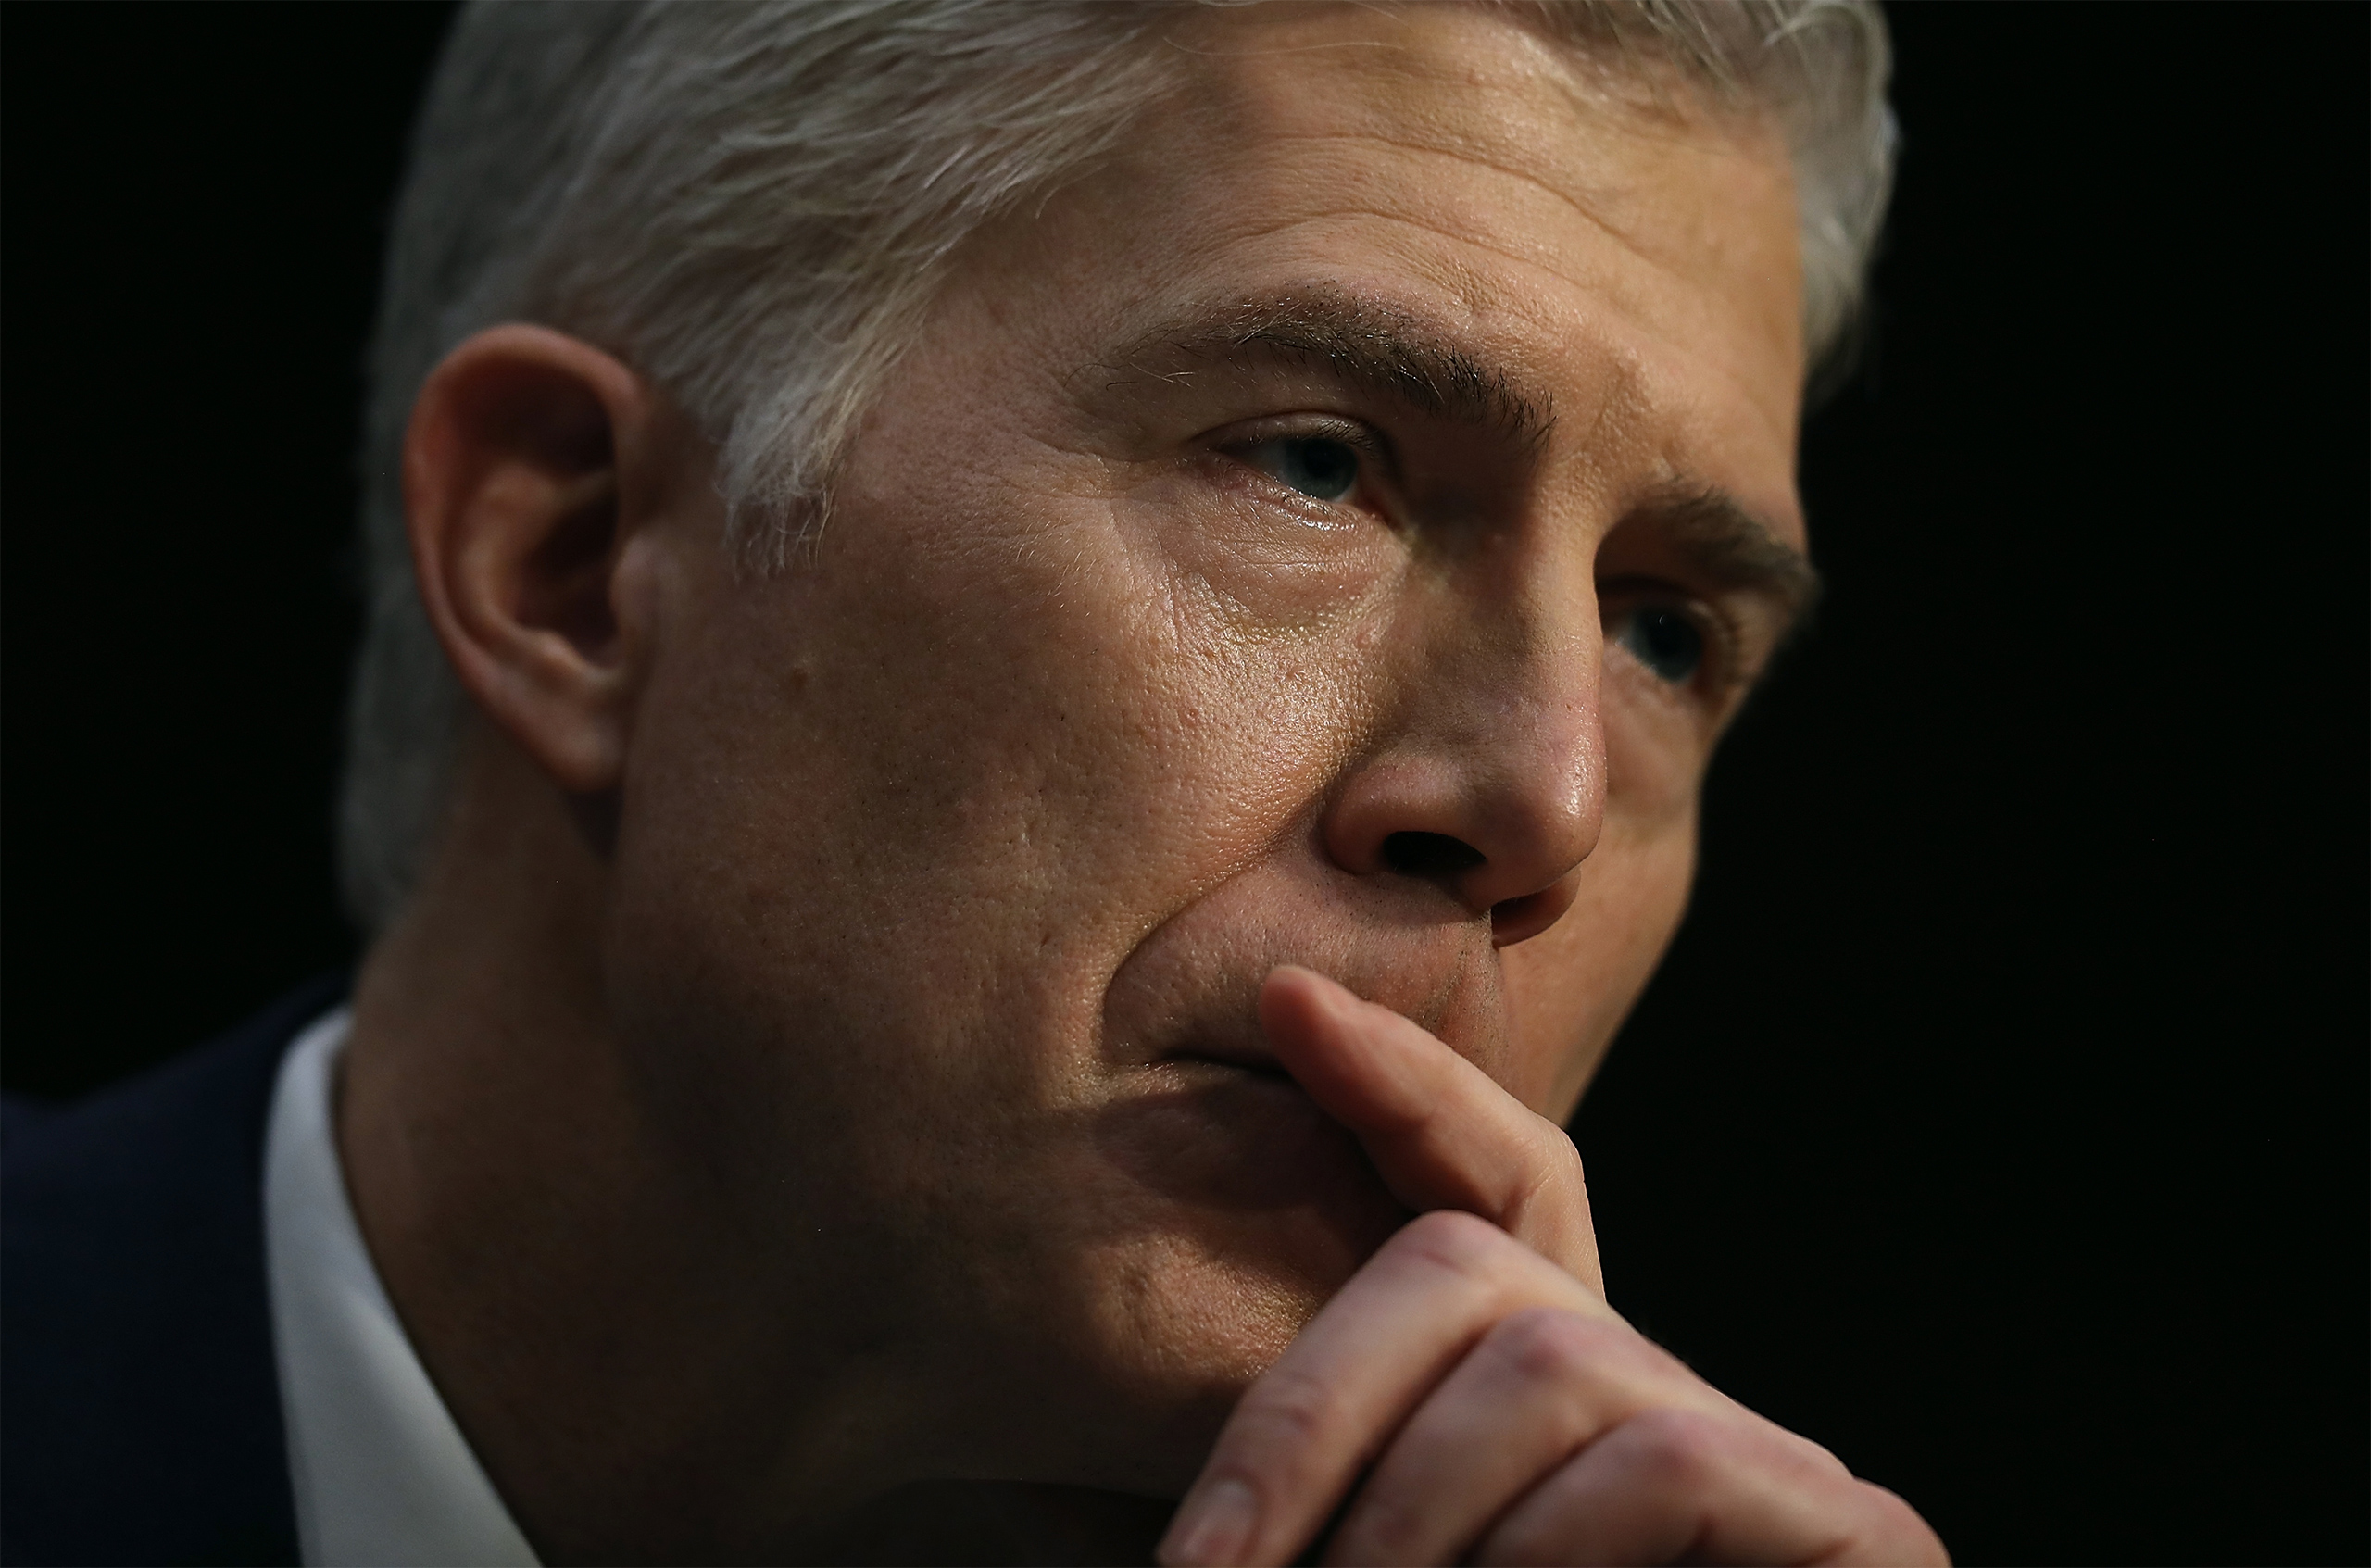 Judge Neil Gorsuch looks on during the first day of his Supreme Court confirmation hearing before the Senate Judiciary Committee in the Hart Senate Office Building on Capitol Hill March 20, 2017 in Washington, DC. (Justin Sullivan—Getty Images)